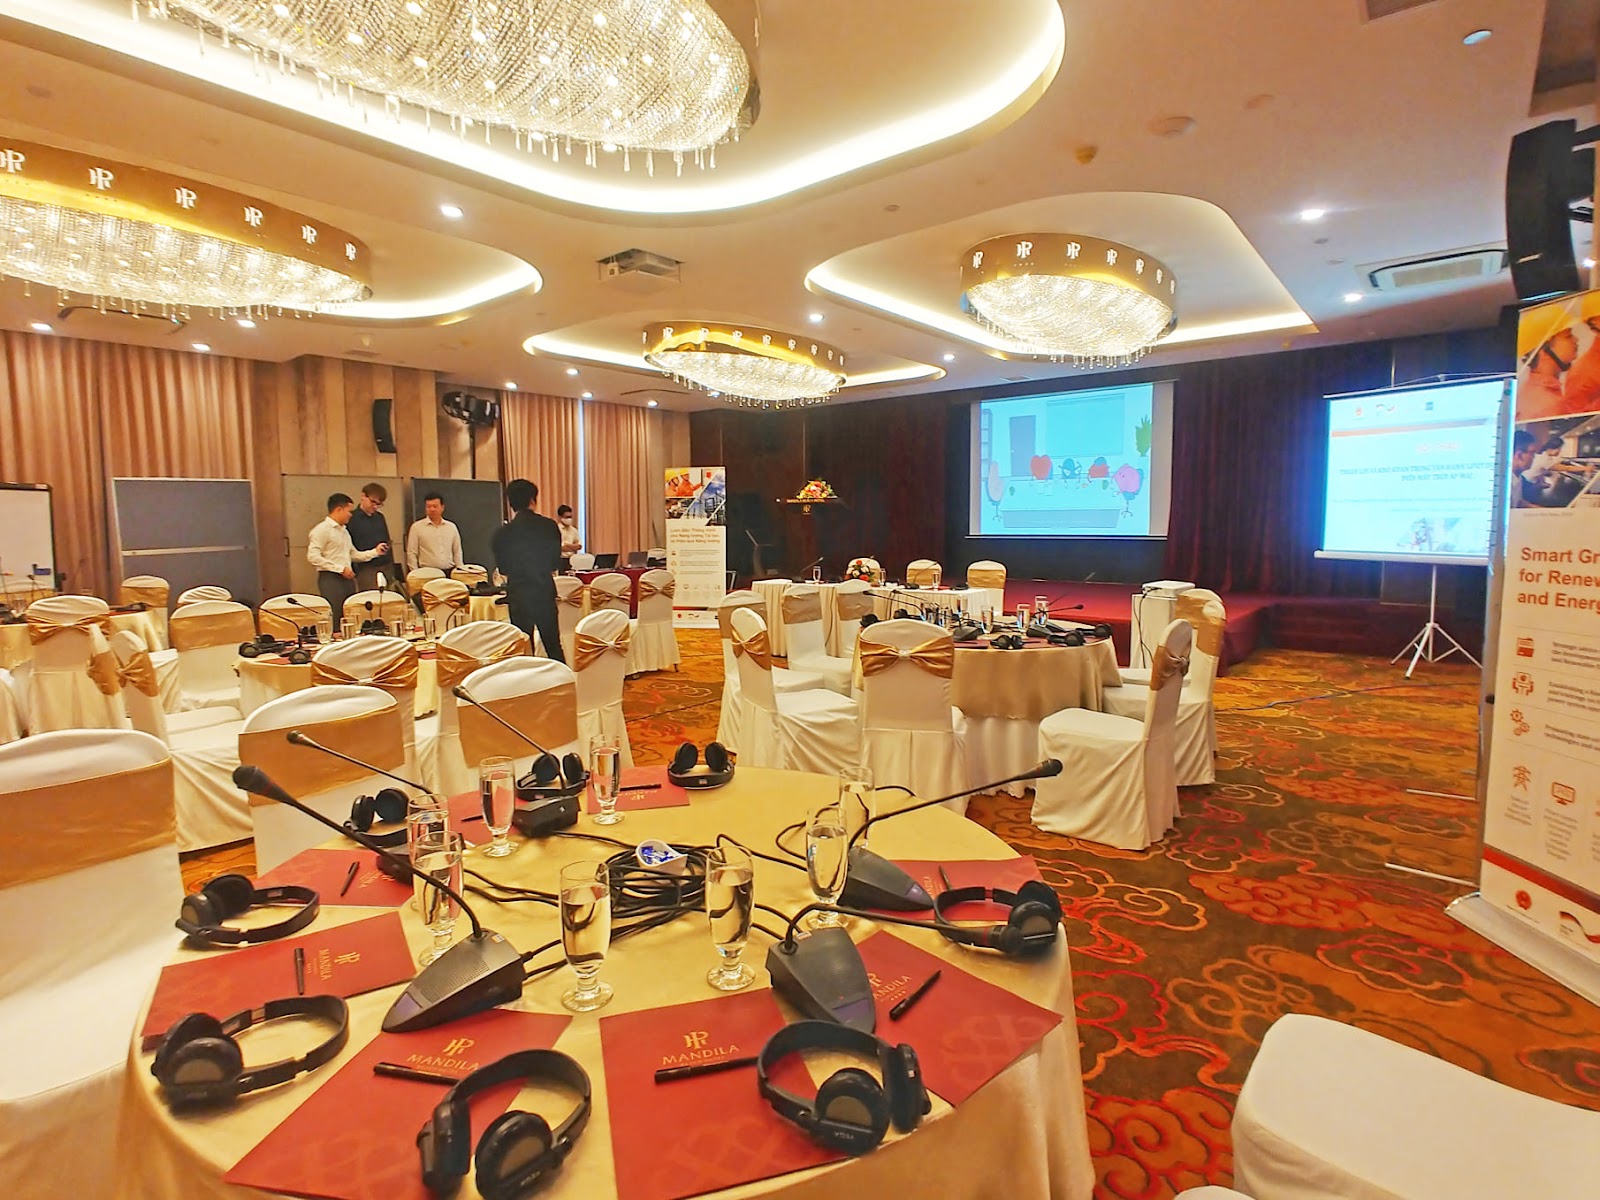 How to organize a company party at a 4-star Da Nang hotel - (2) Modern equipment at the Jasmine conference room